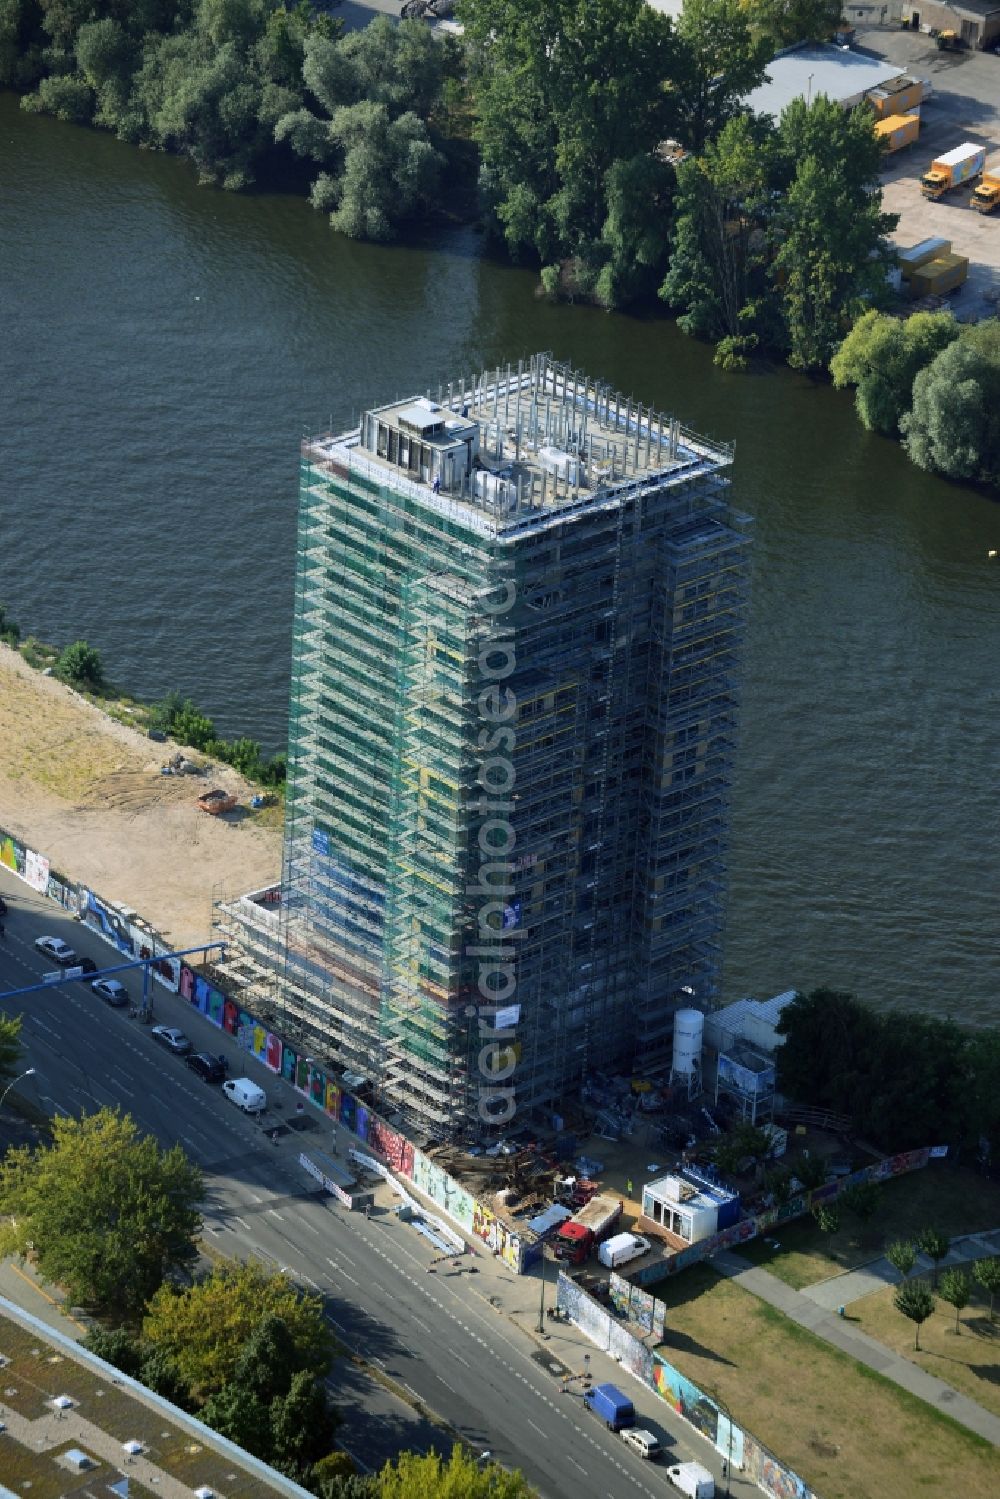 Berlin from above - Construction site of Project Living Levels at Muhlenstrasse on the banks of the River Spree in Berlin - Friedrichshain. On the grounds of the Berlin Wall border strip at the EastSideGallery, the company Living Bauhaus is building a futuristic high-rise residential. The real estate service company City & Home GmbH manages the available apartments